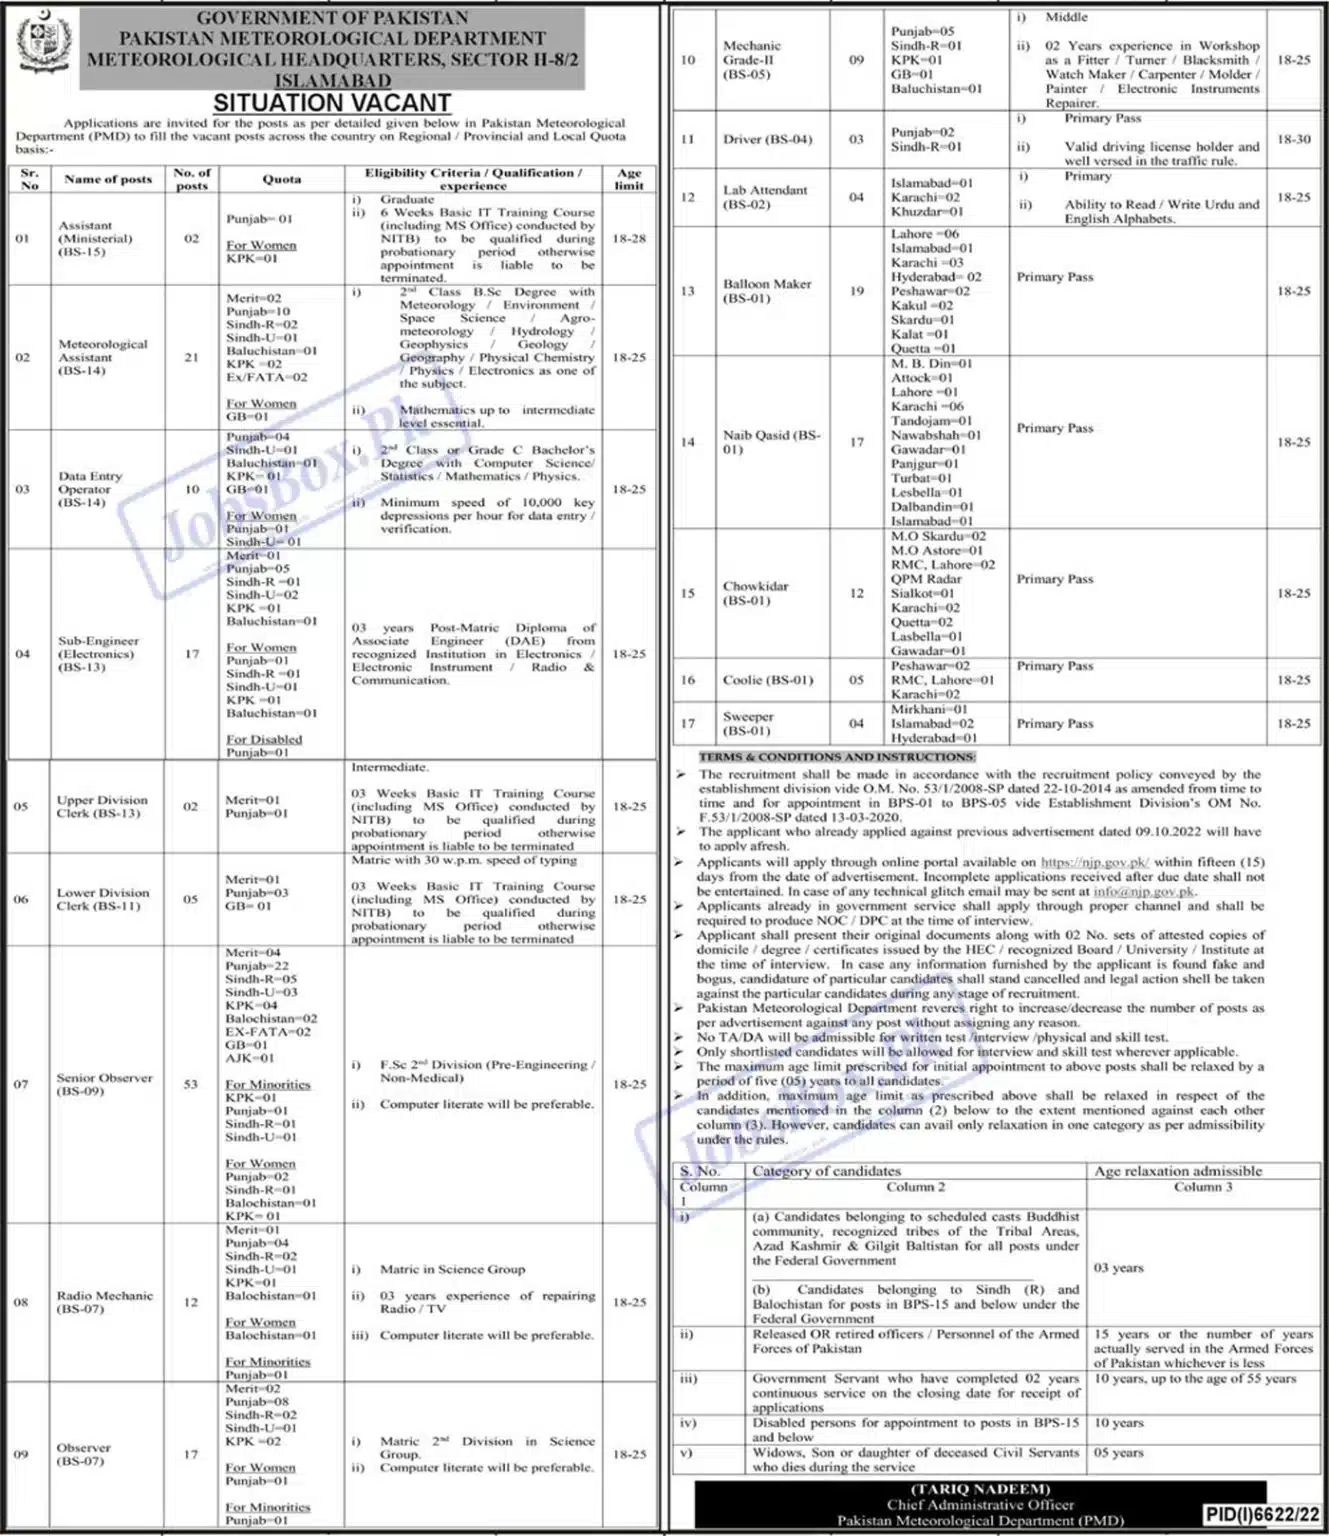 "Apply Online for Jobs 2023 at Pakistan Meteorological Department, Government of Pakistan"